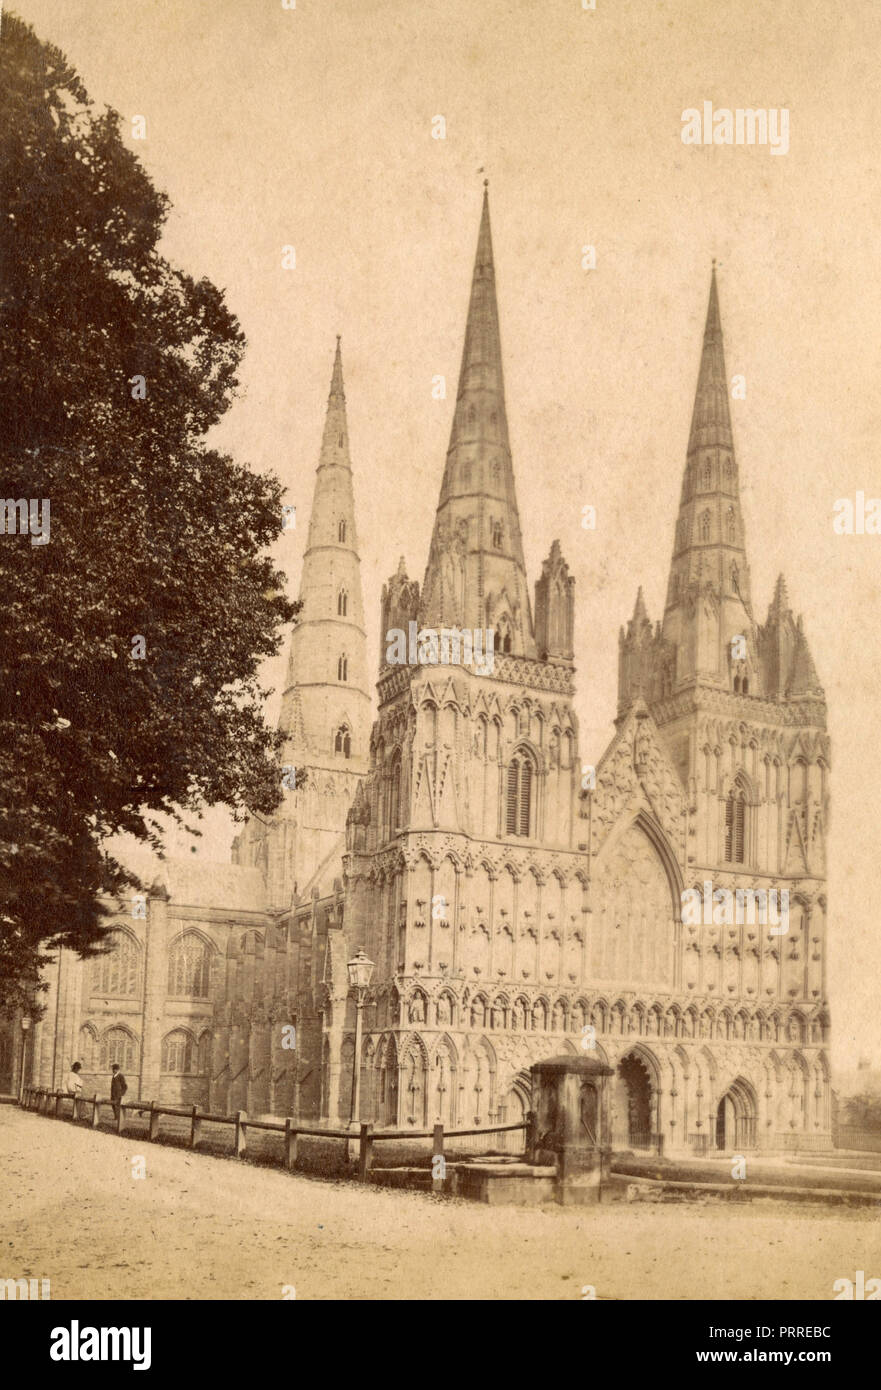 Lichfield cathedral, England 1870s Stock Photo